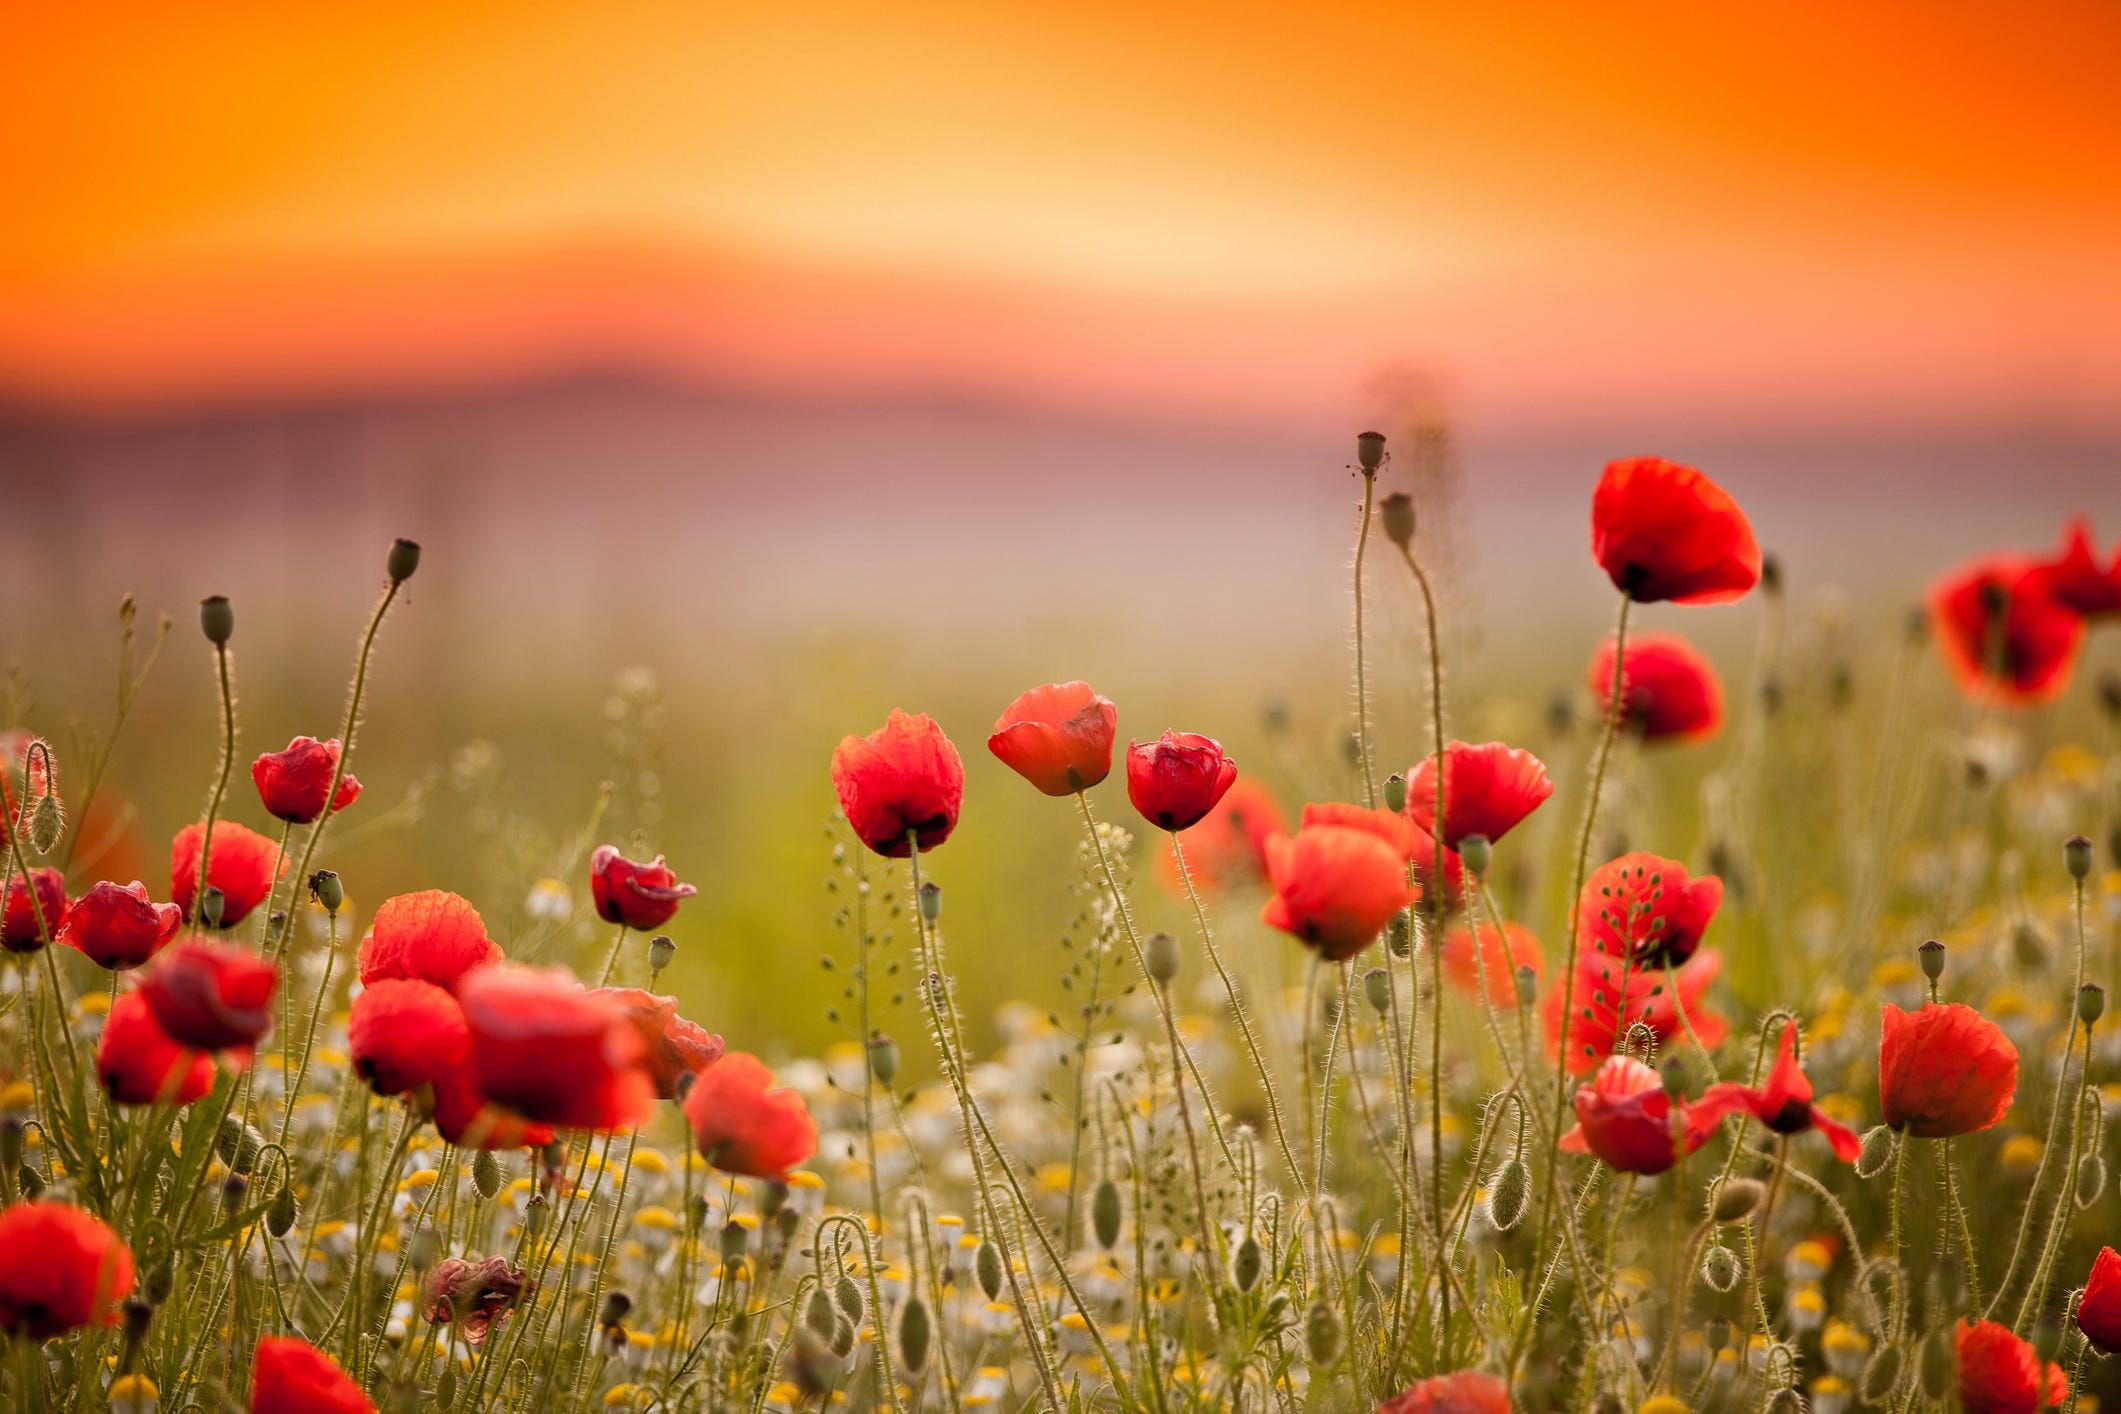 Memorial Day Poppies - History of the Red Poppy for Remembrance